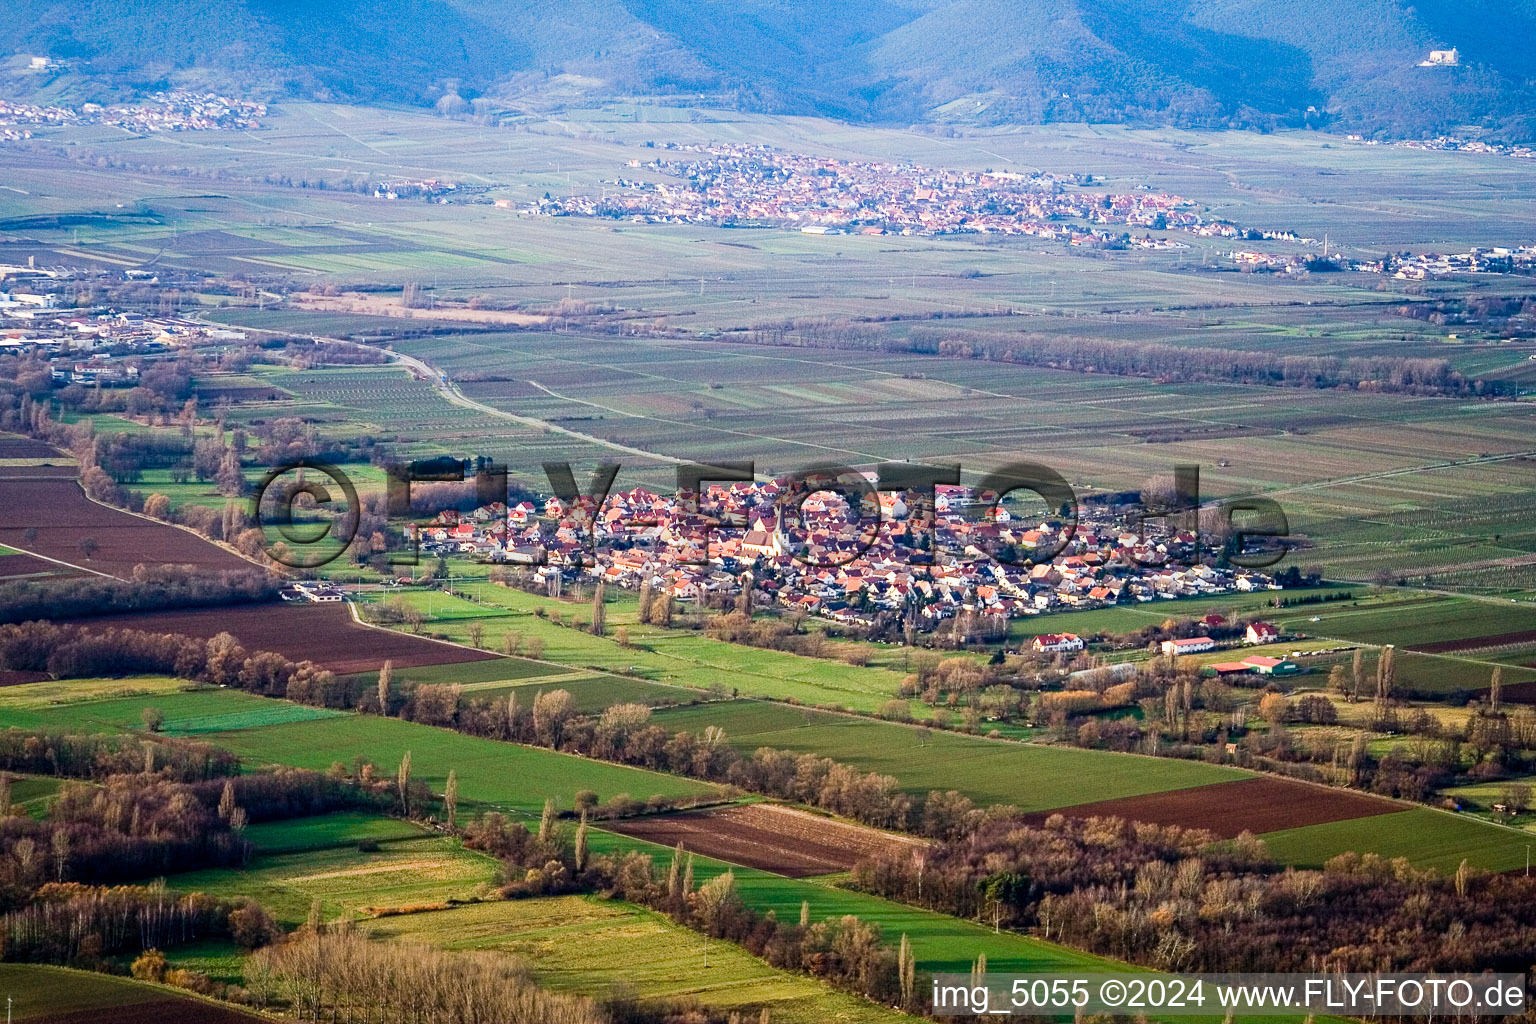 Bird's eye view of Village - view on the edge of agricultural fields and farmland in Venningen in the state Rhineland-Palatinate